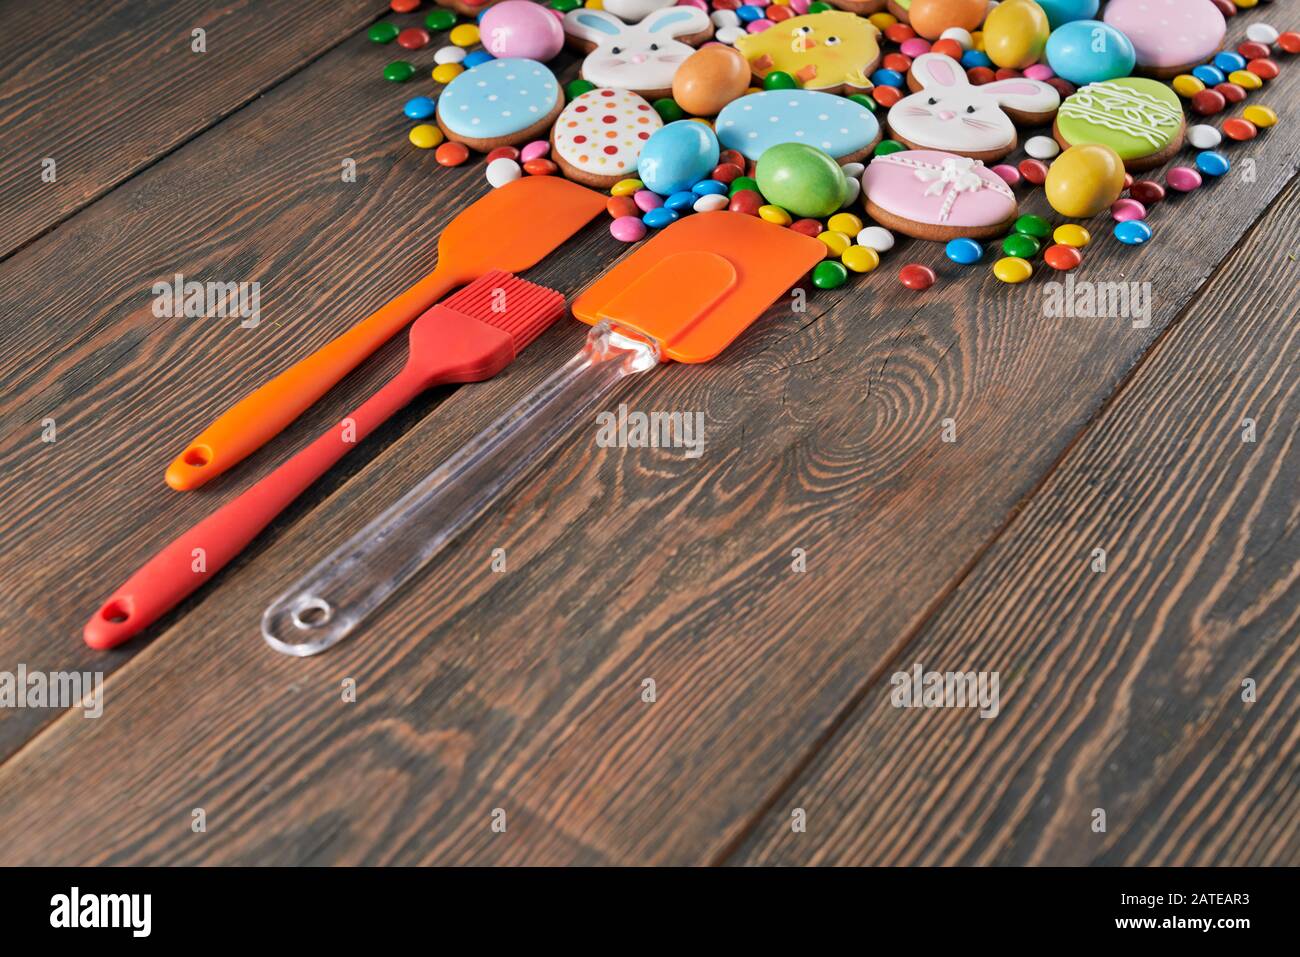 Crop of colorful ginger glazed cookies and chocolate balls with sugar shell isolated on wooden table. Homemade pastry in shape of easter animals, eggs and carrots, three silicone kitchen tools nearby. Stock Photo